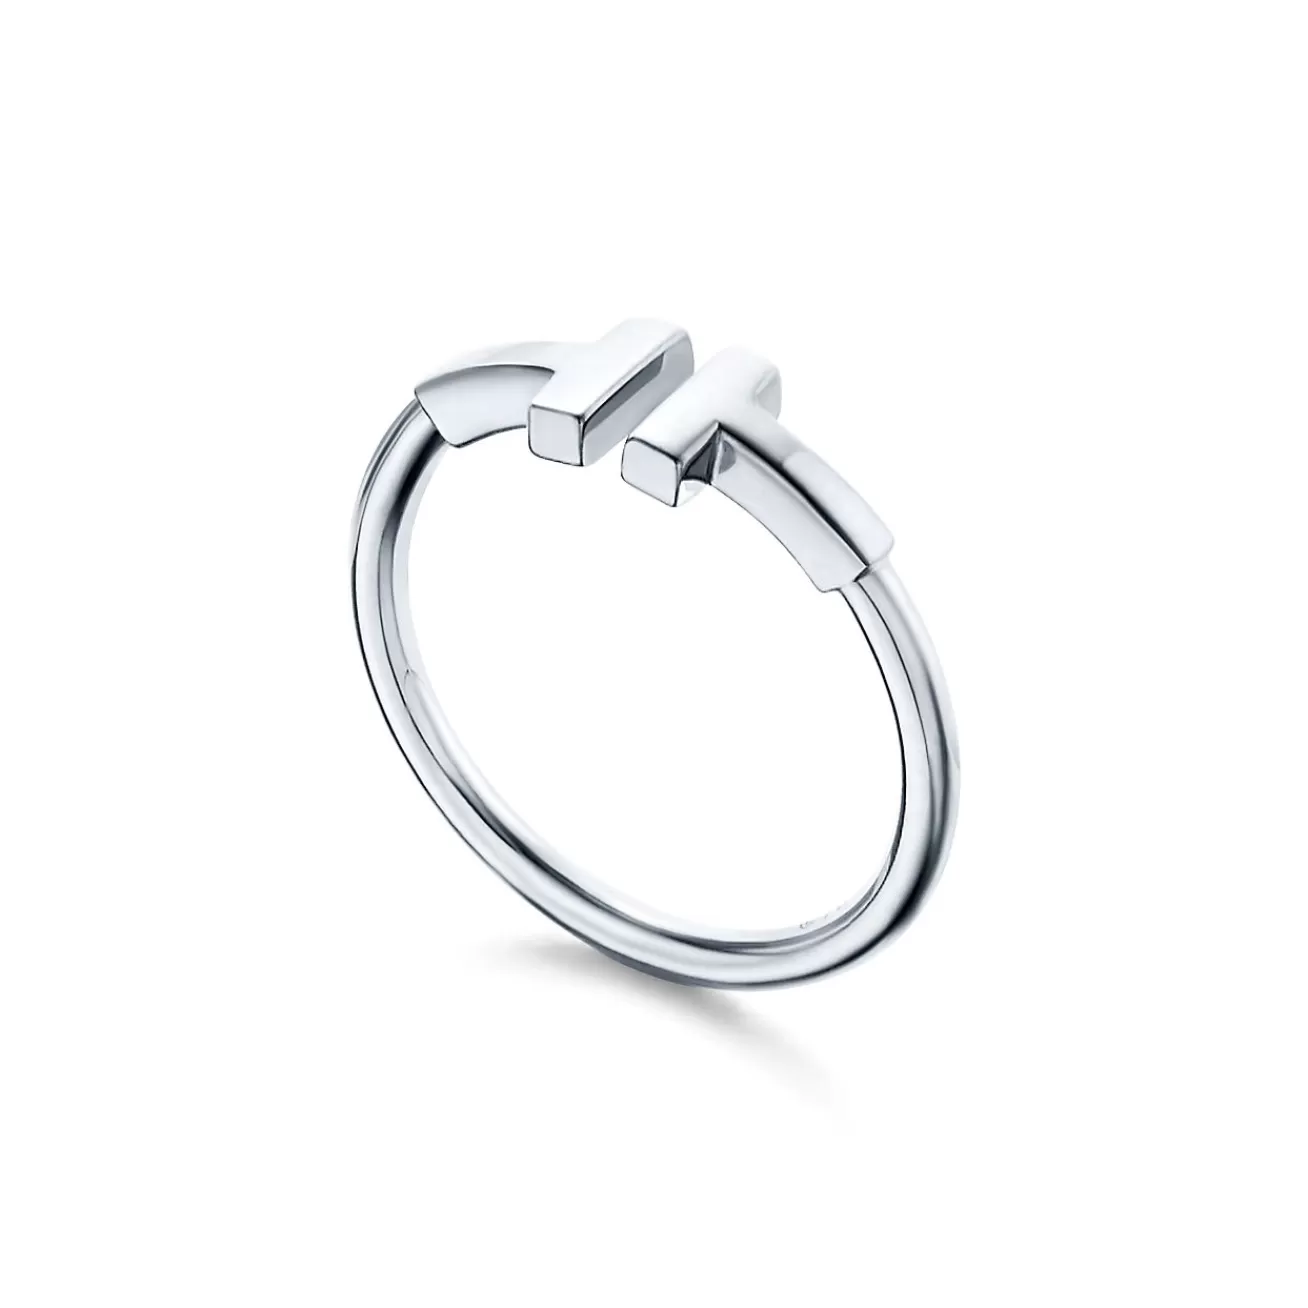 Tiffany & Co. Tiffany T wire ring in 18k white gold. | ^ Rings | Men's Jewelry